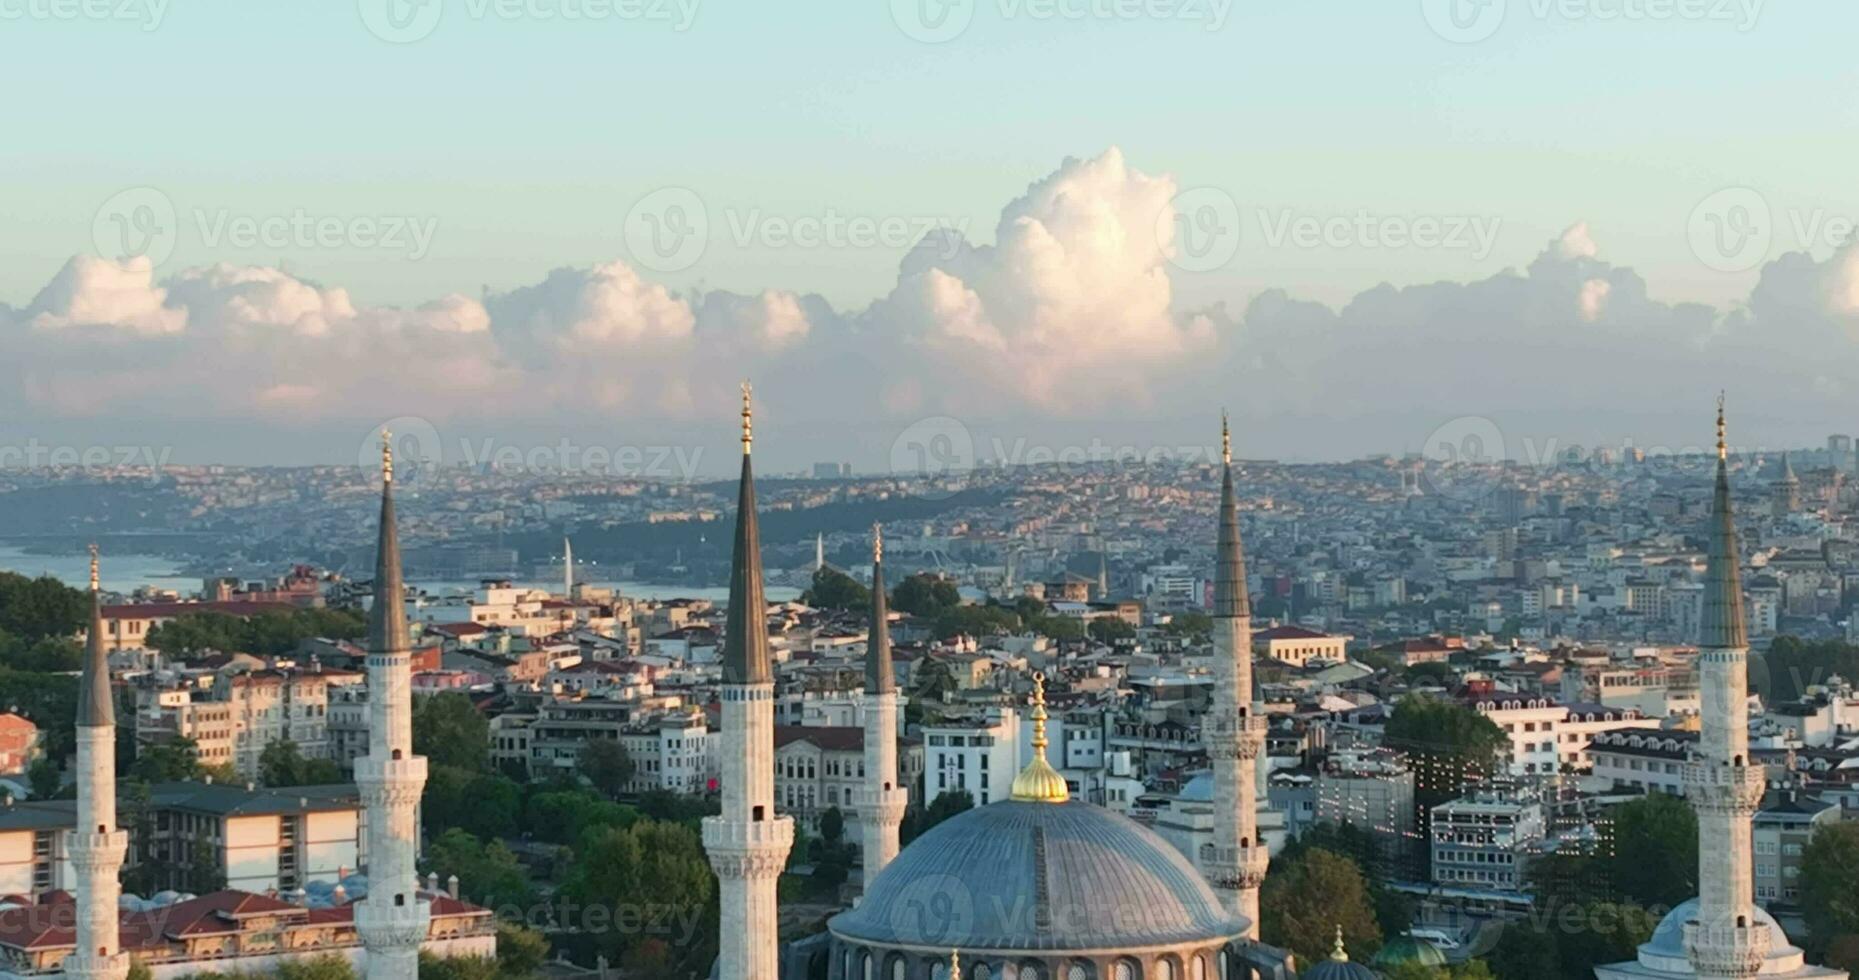 Istanbul, Turkey. Sultanahmet with the Blue Mosque and the Hagia Sophia with a Golden Horn on the background at sunrise. Cinematic Aerial view. photo